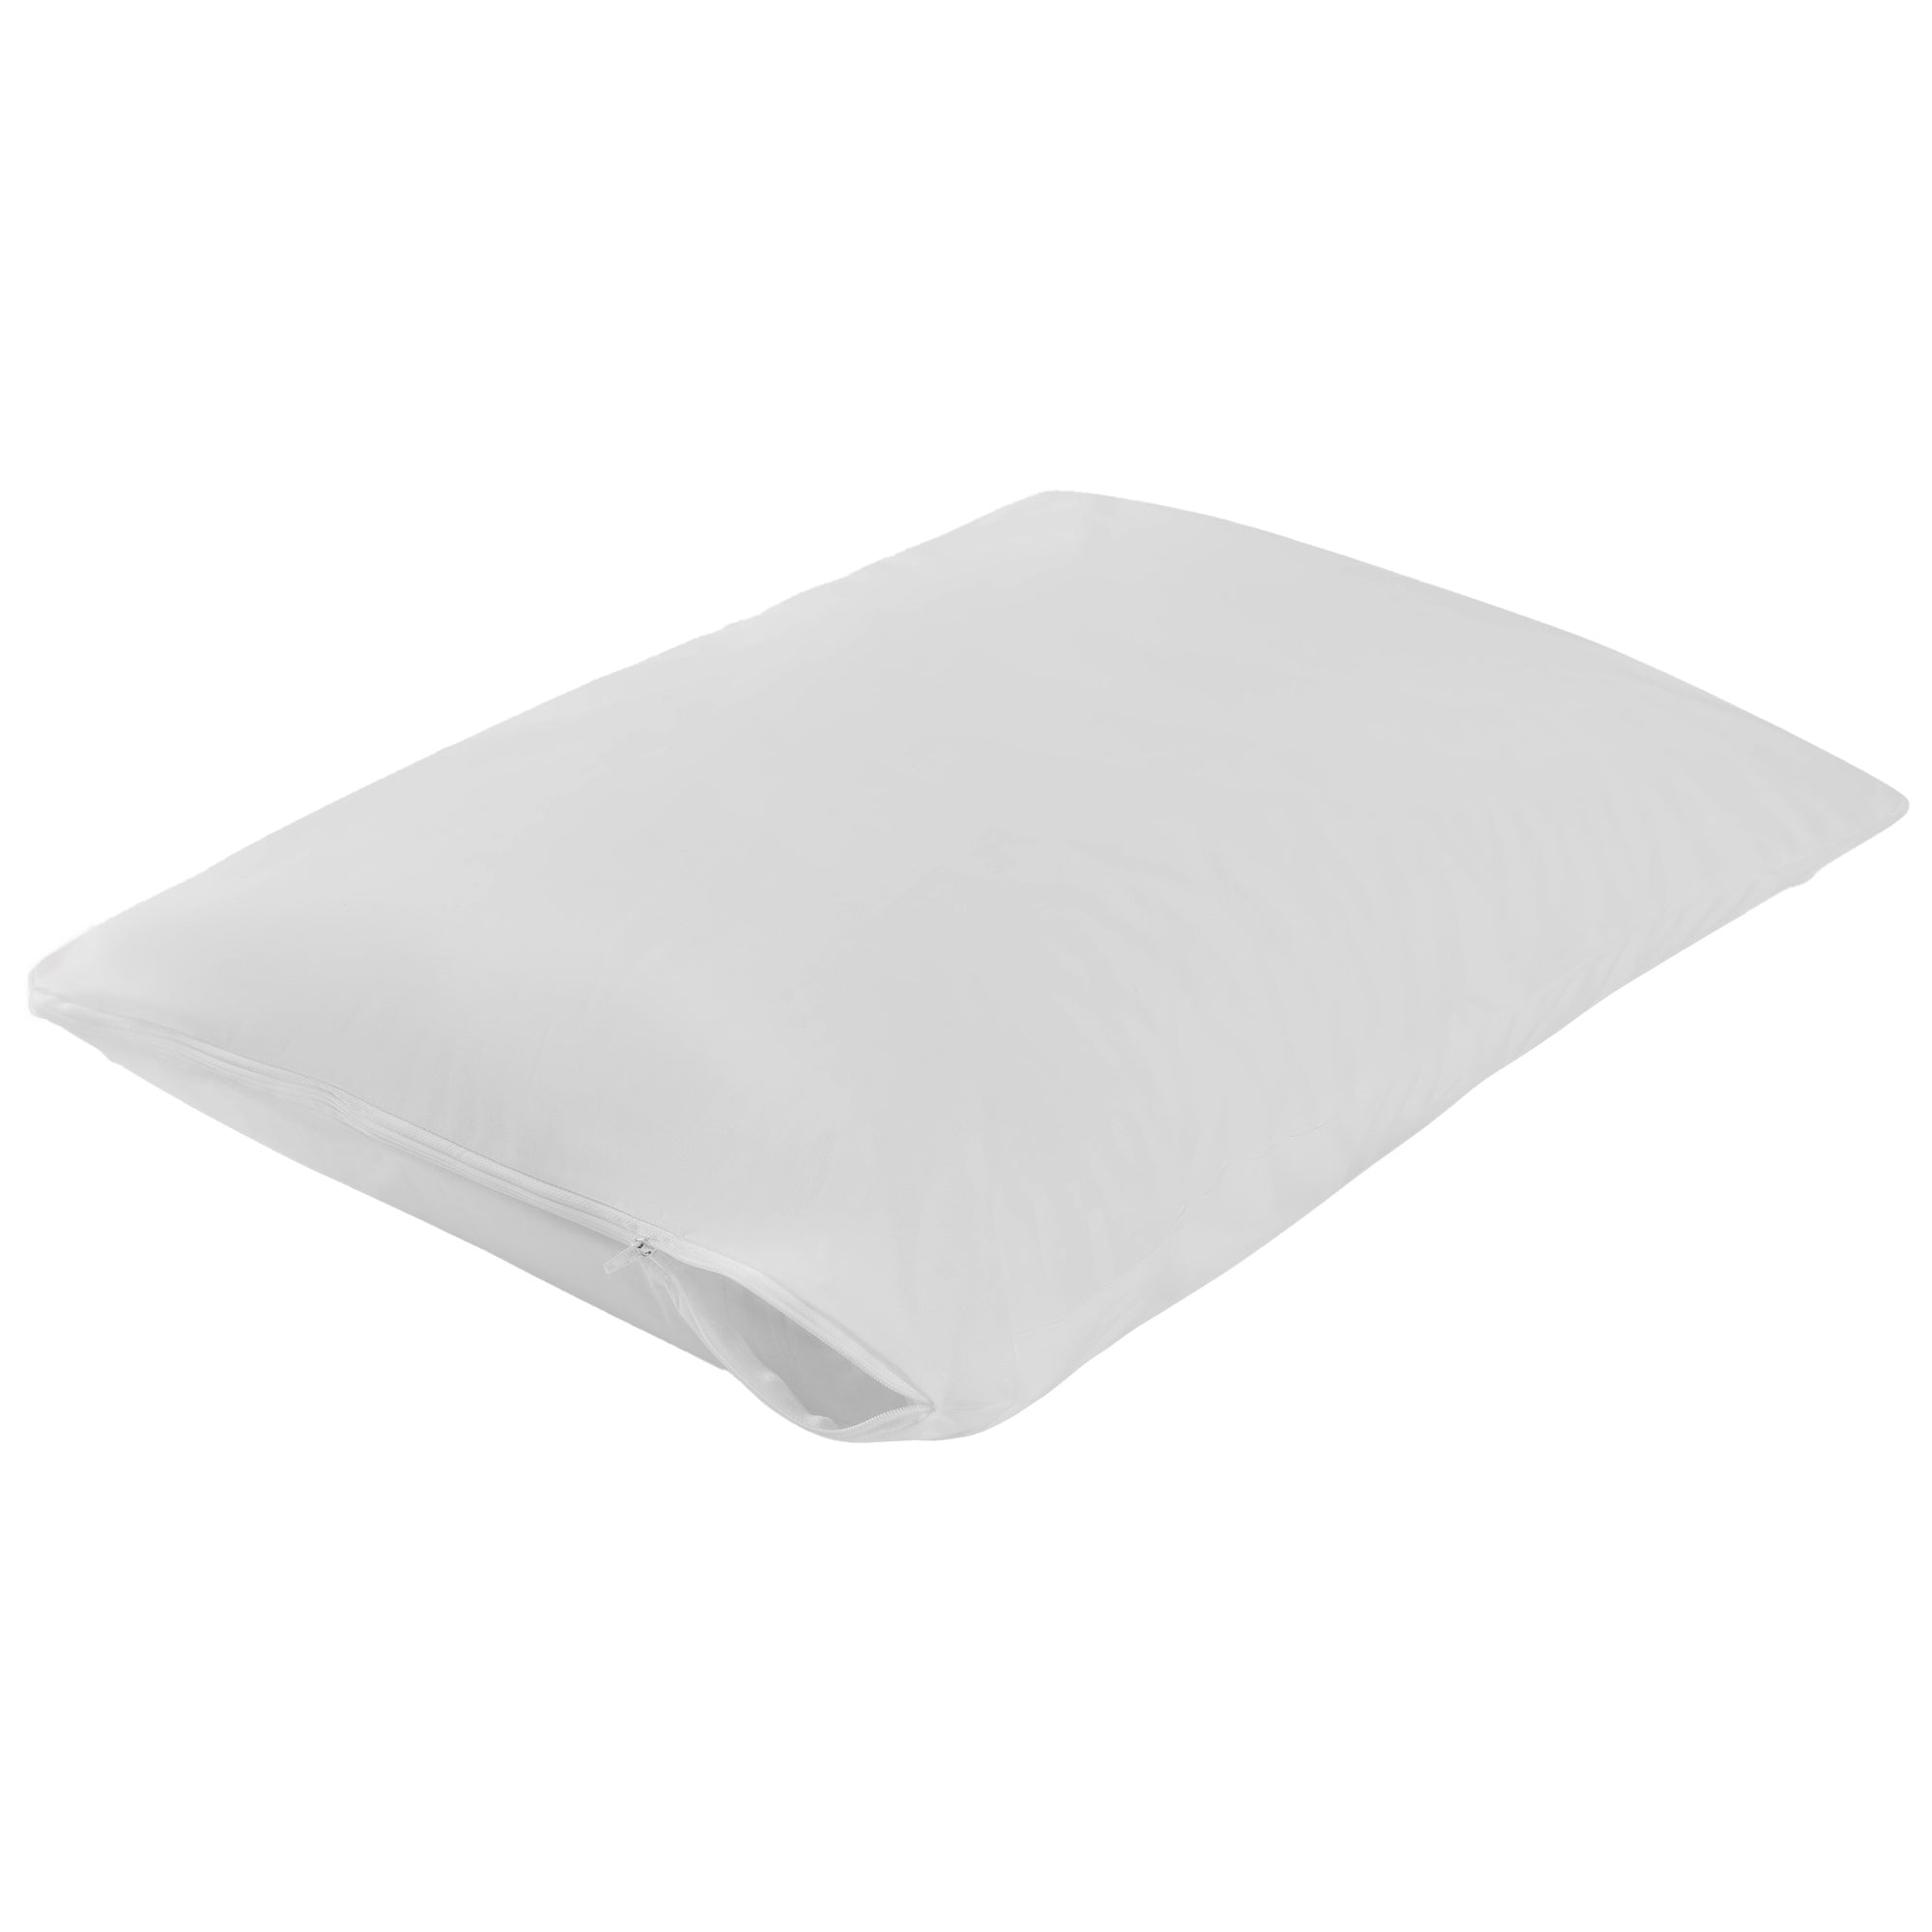 Bargoose Standard Zippered Pillow Cover (White) | T-130 Cotton/Polyester Blend | Case Pack Available Pillow Protector Bargoose Home Textiles, Inc. Standard (21" x 27") 